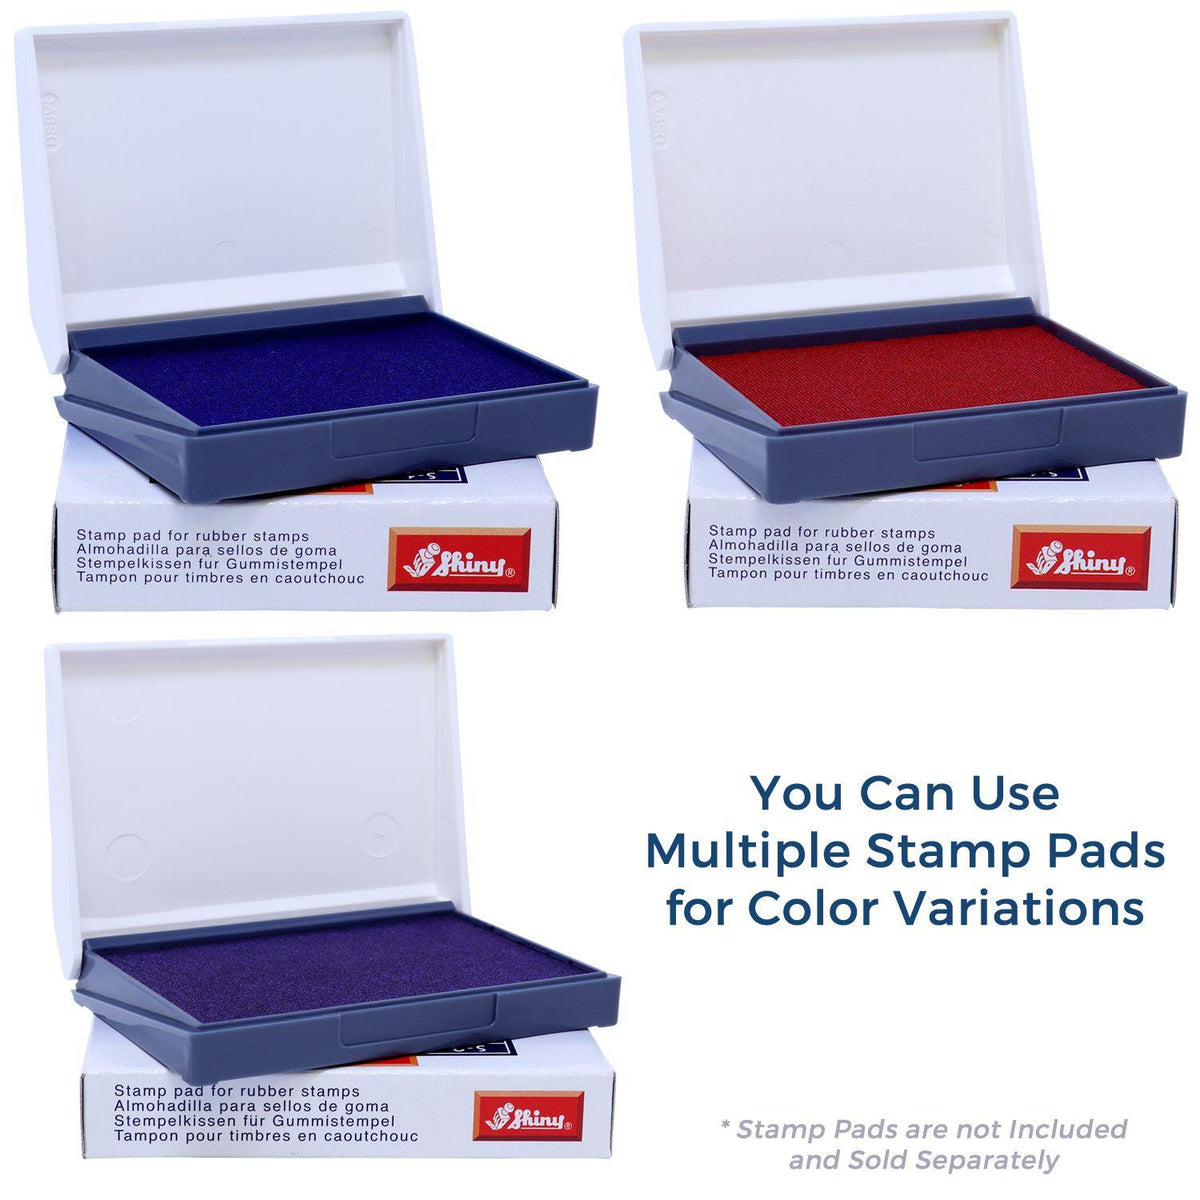 Stamp Pads for File Copy Rubber Stamp Available